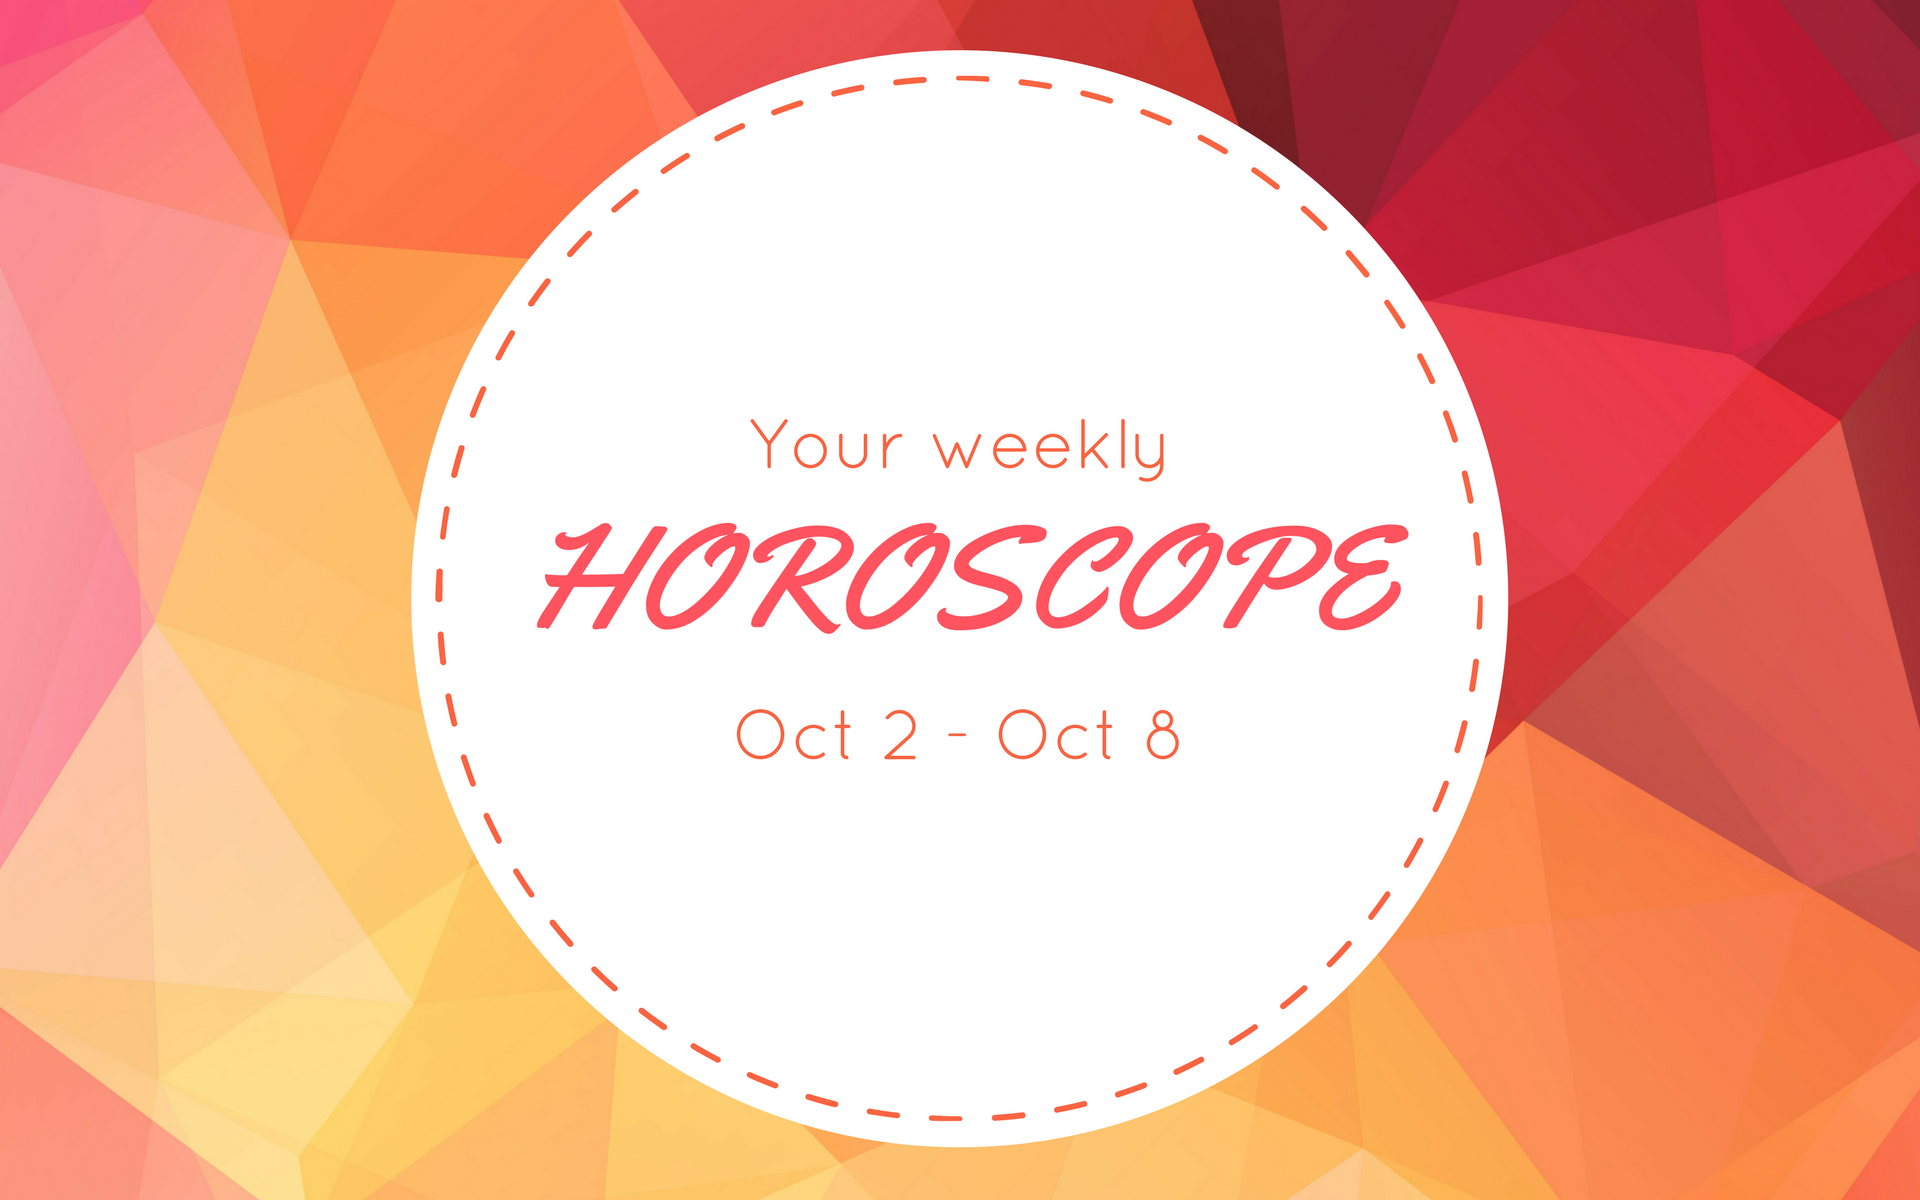 Your Weekly Horoscope: Oct 2 - Oct 8